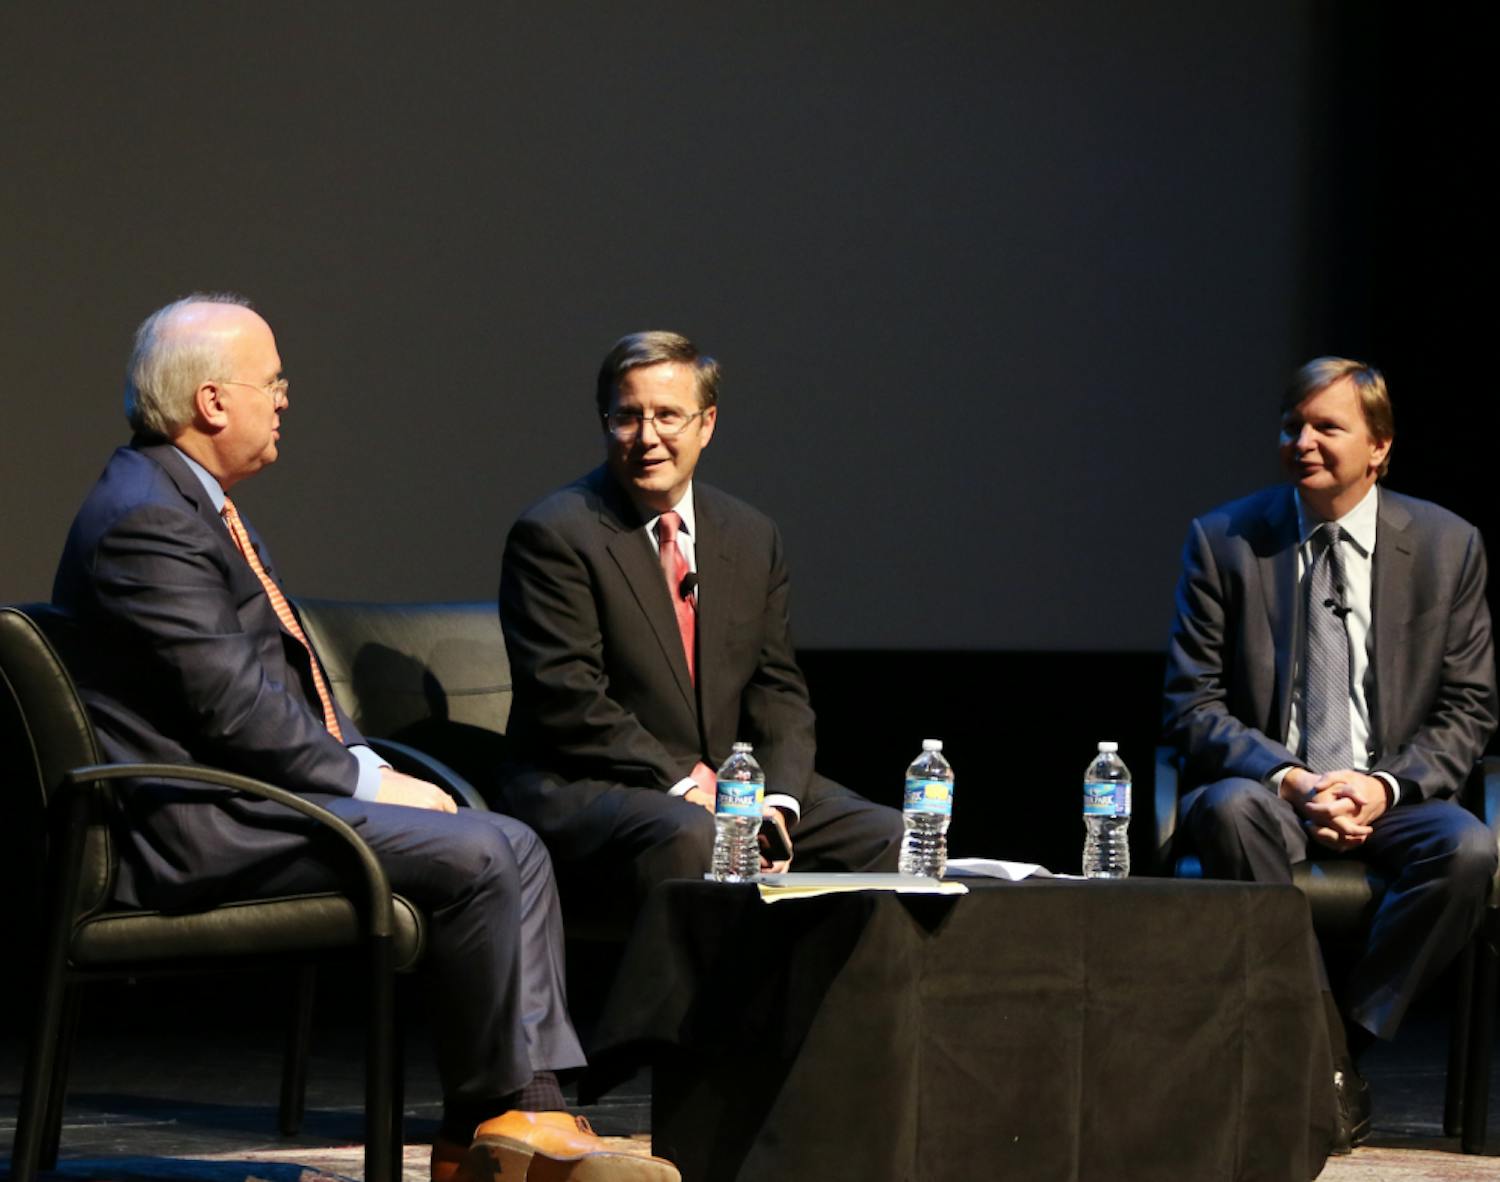 The event, which was moderated by Peter Feaver, focused on how the United States will move forward after the 2016 election.